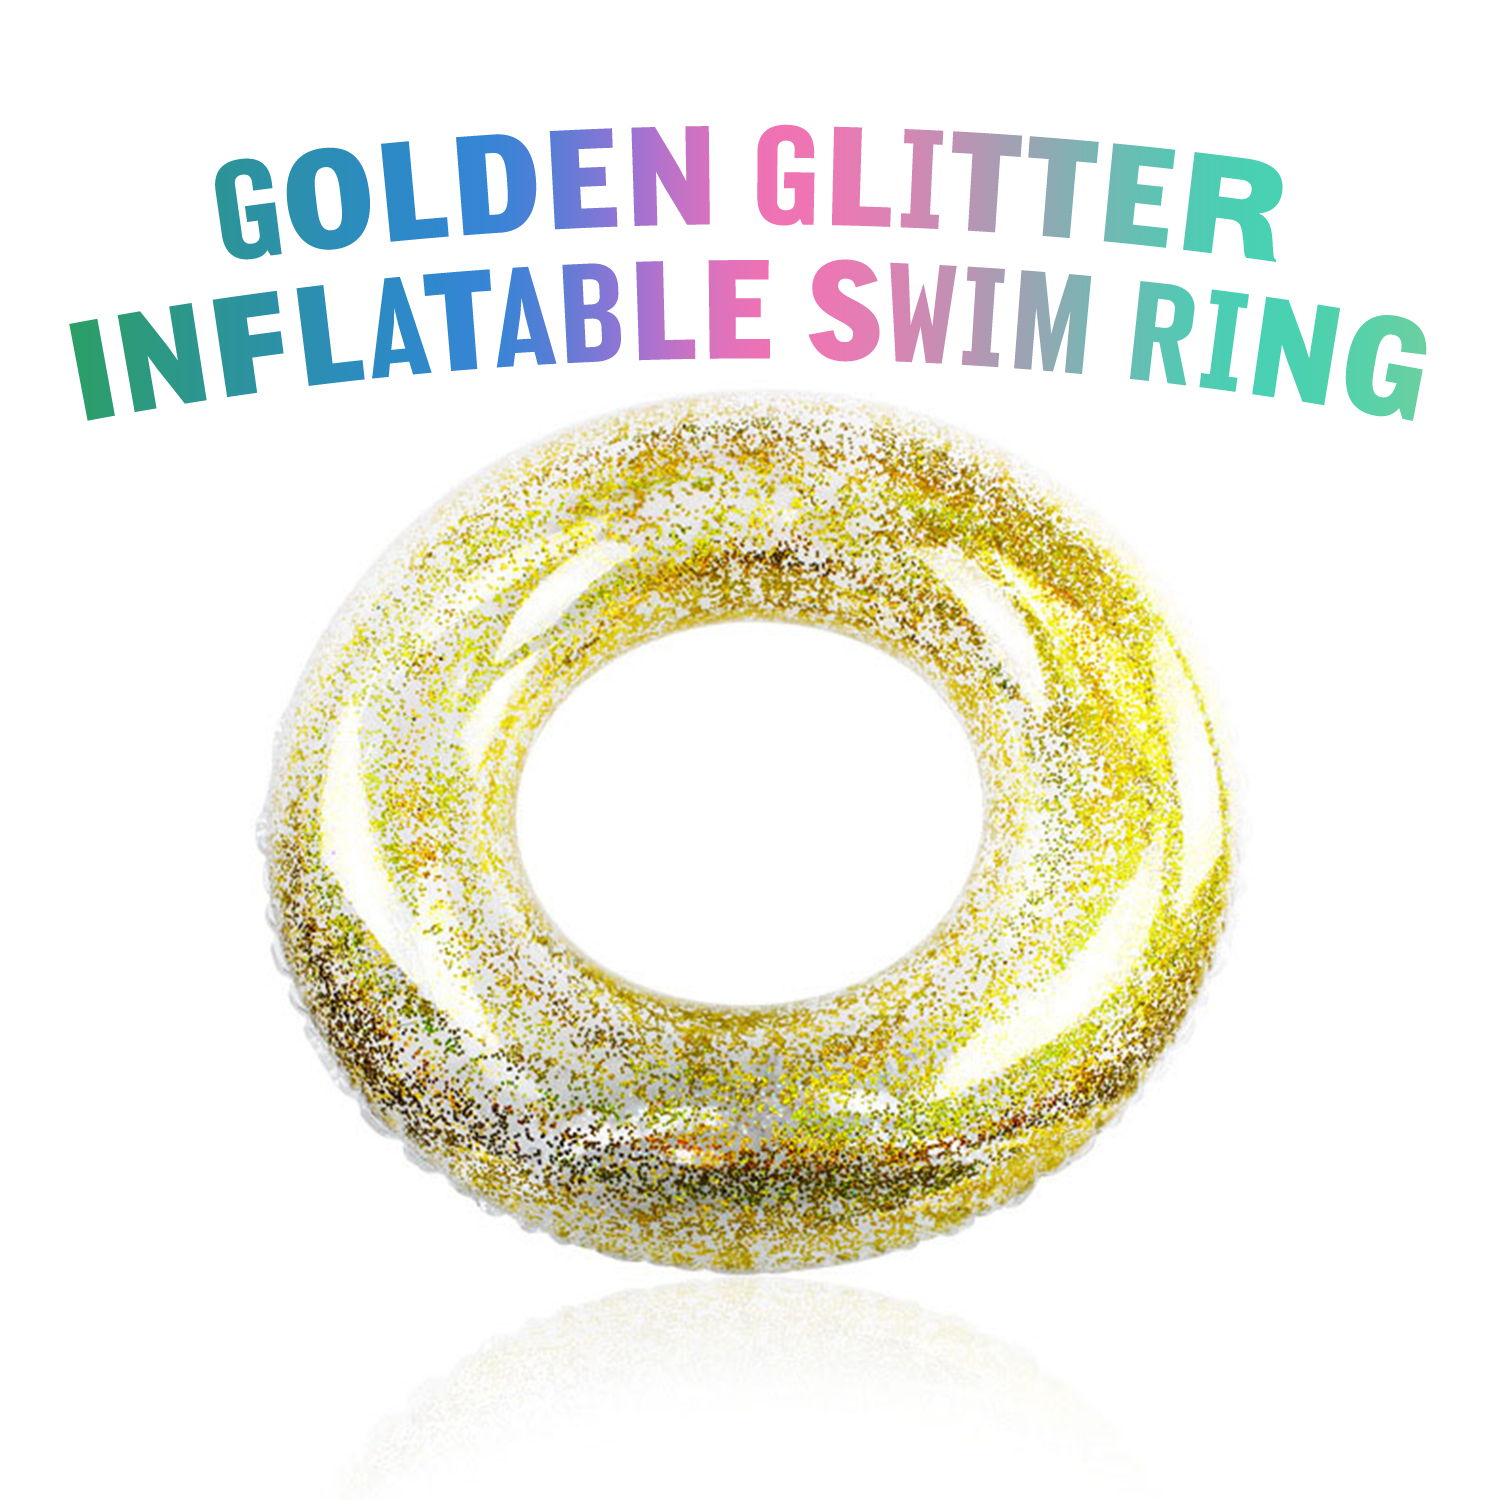 &nbsp;Glitter Swim Ring - Extra Large for The Pool Beach or Lake-Kids Teens Adults Glitter Inside Sparkles and Shines in The Sun - The Original Glitter Inflatable Tube Floats - image 2 of 8